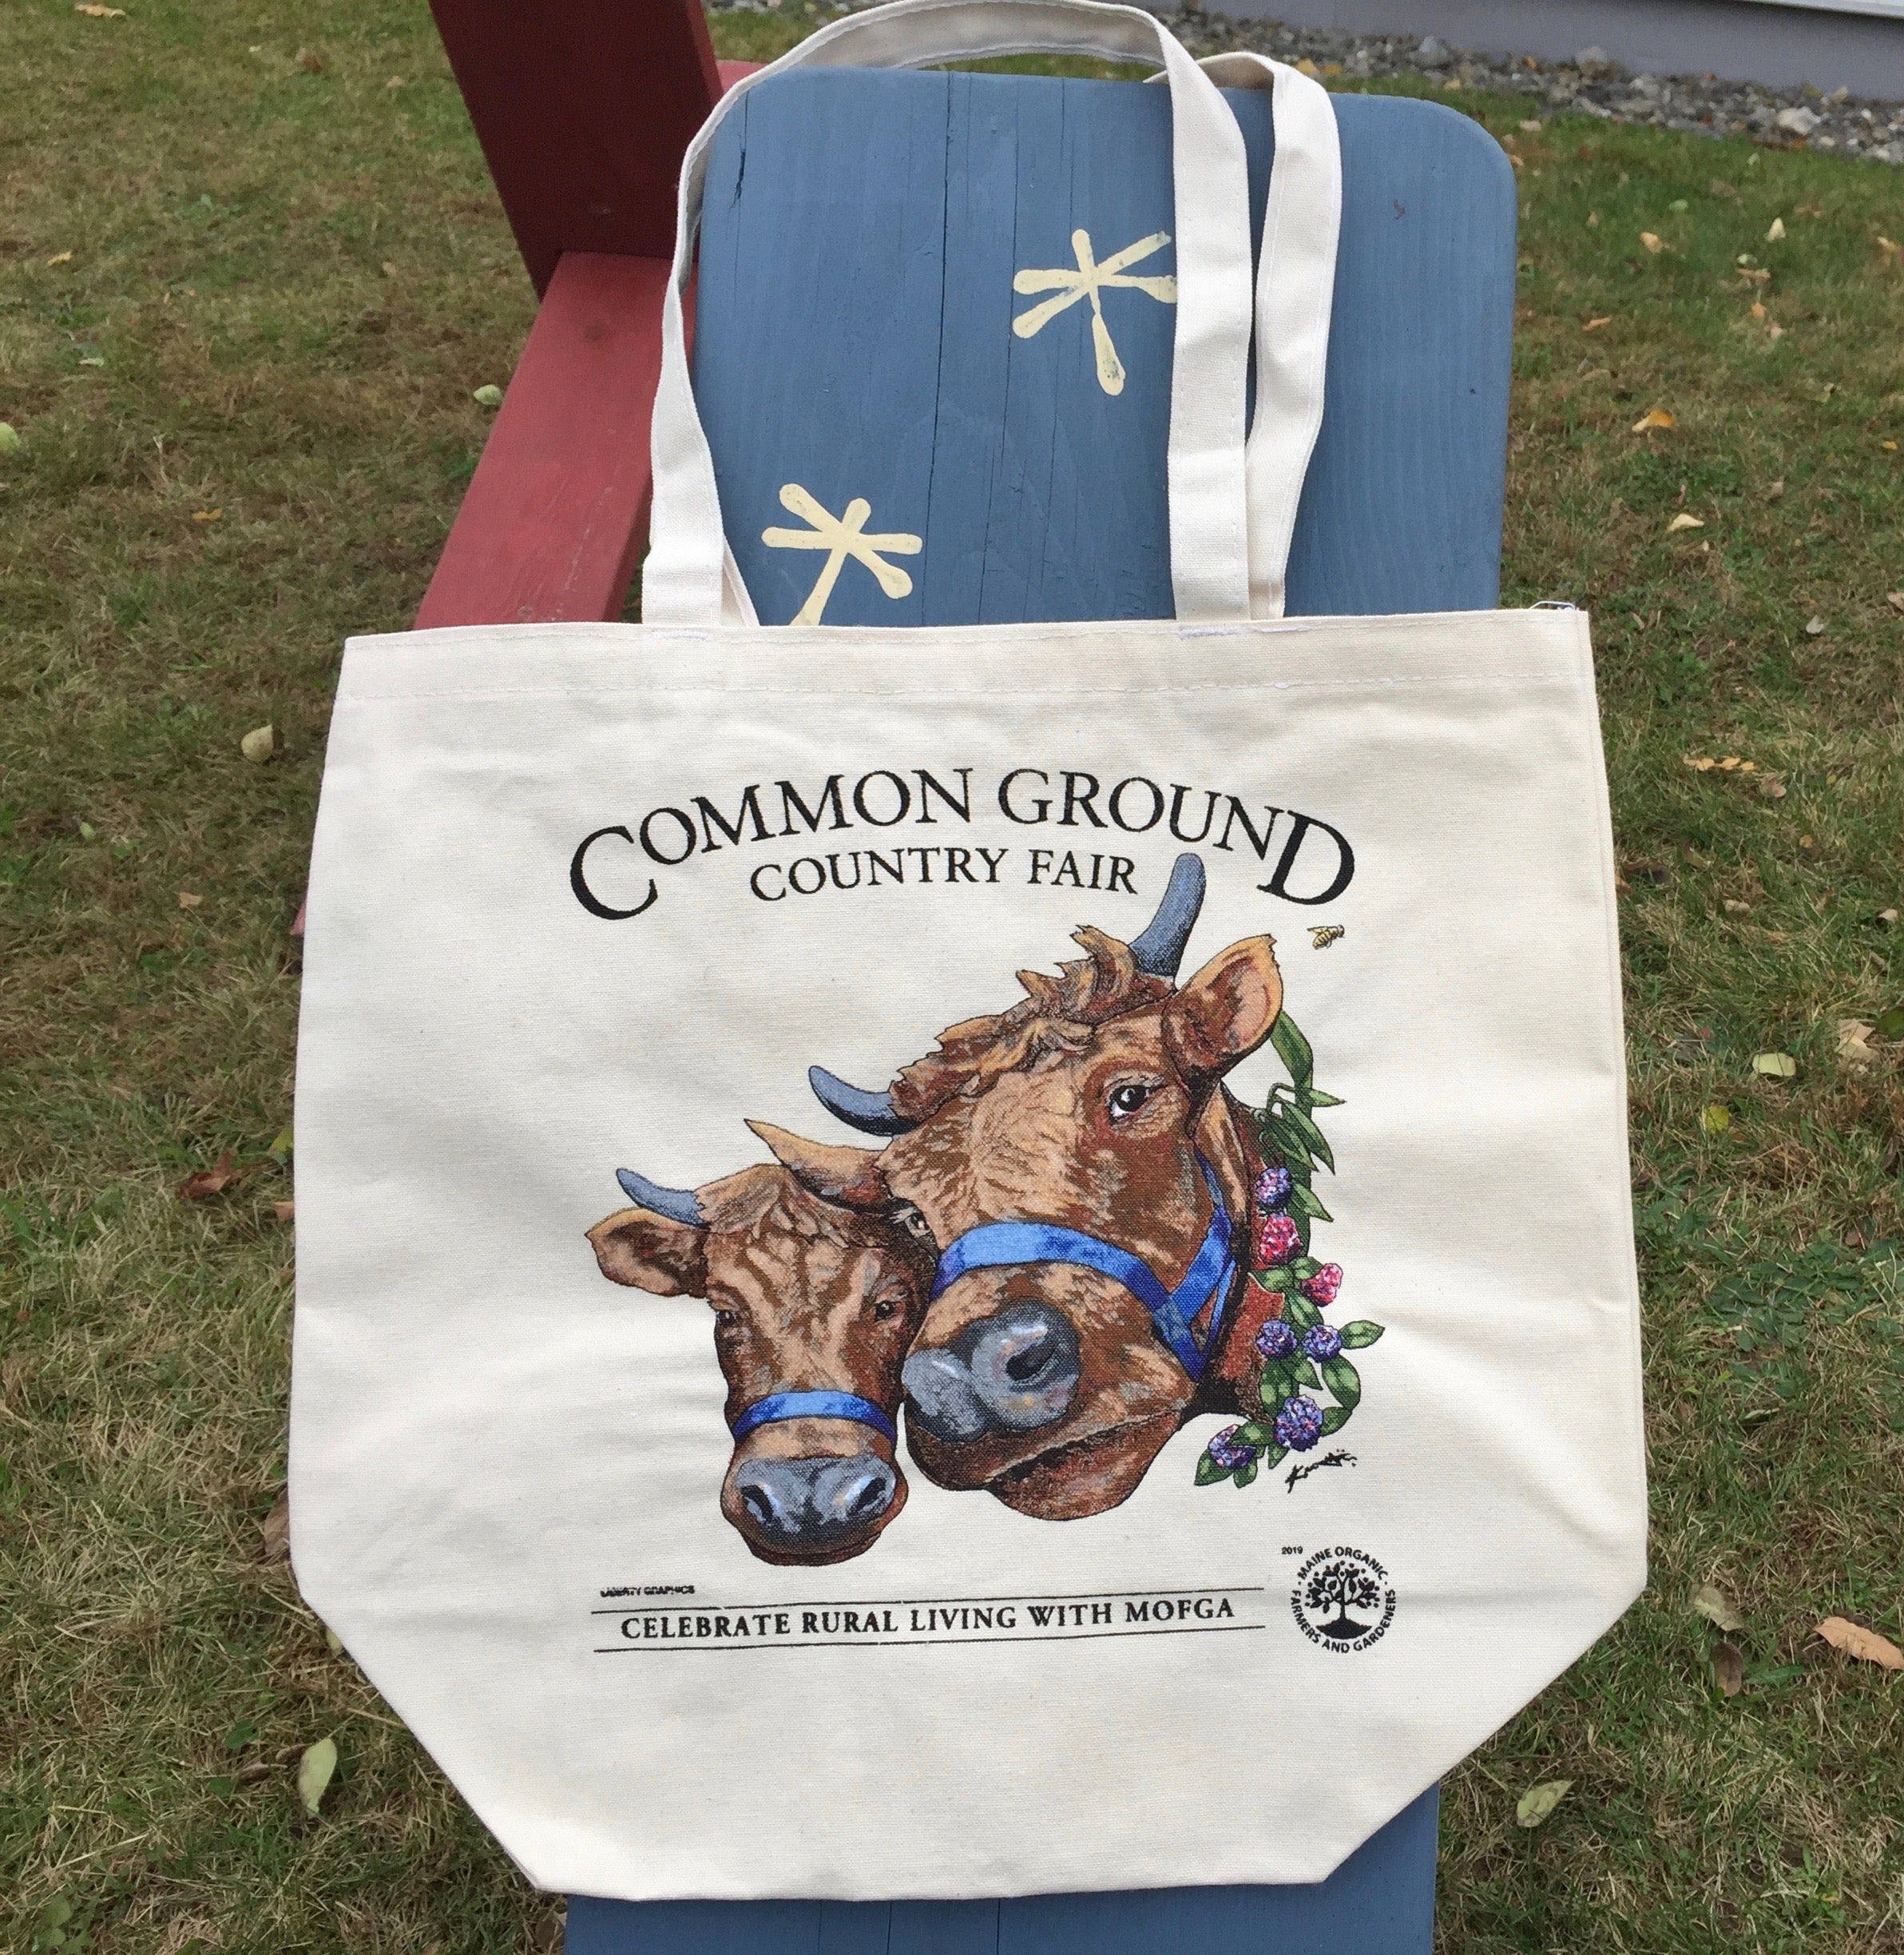 Vermont Country Store Tote Bag